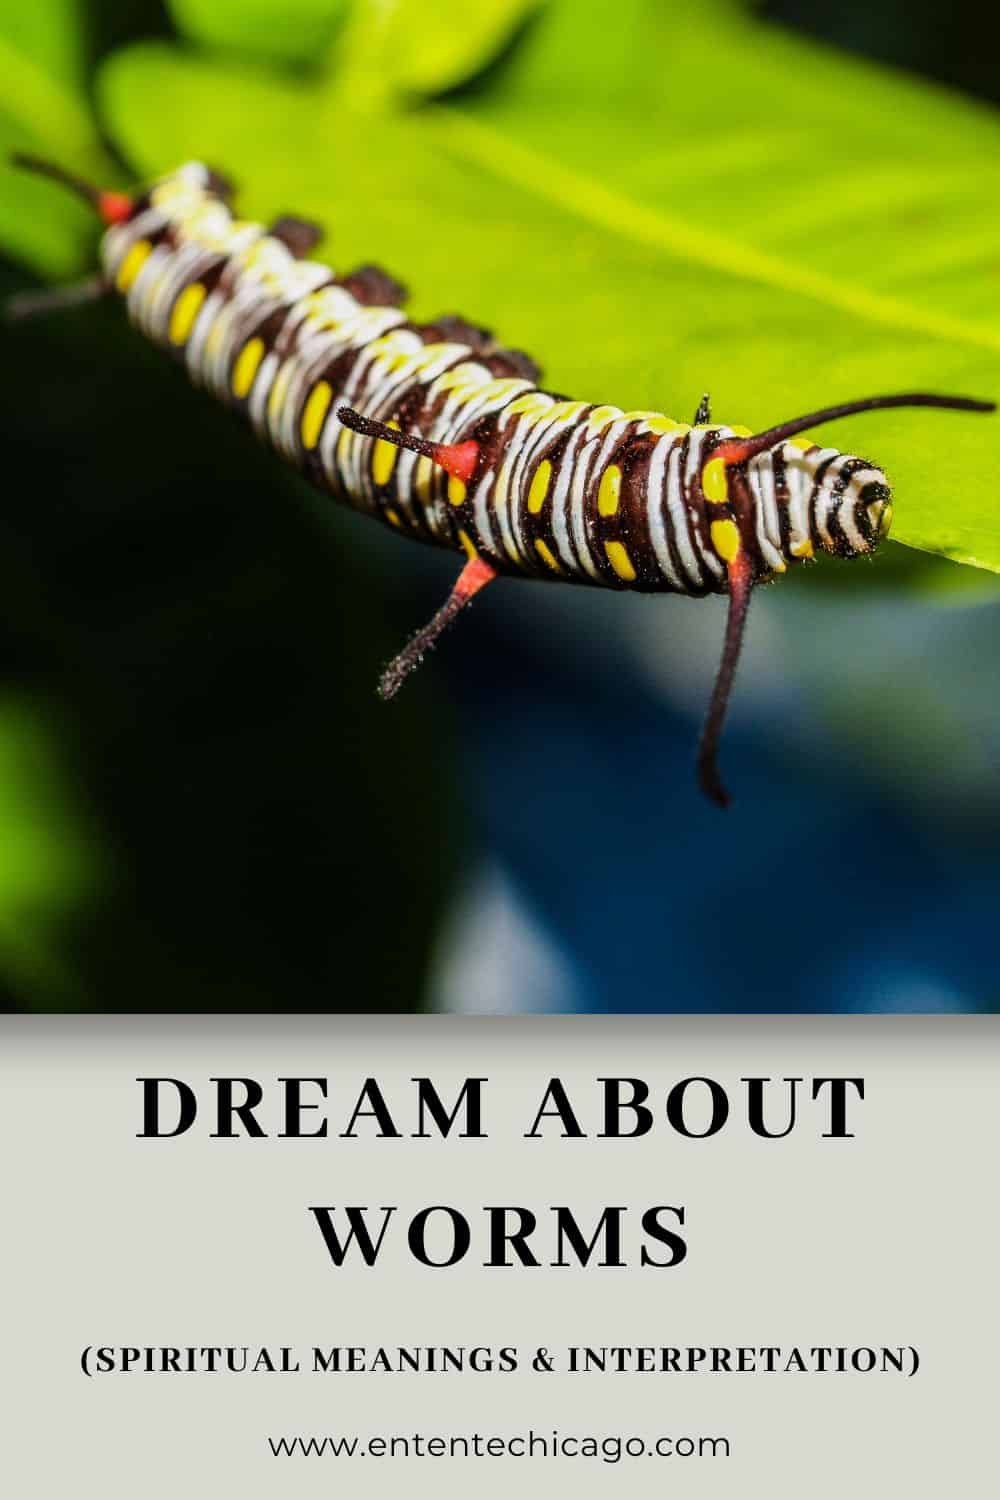 Dream About Worms (Spiritual Meanings & Interpretation)